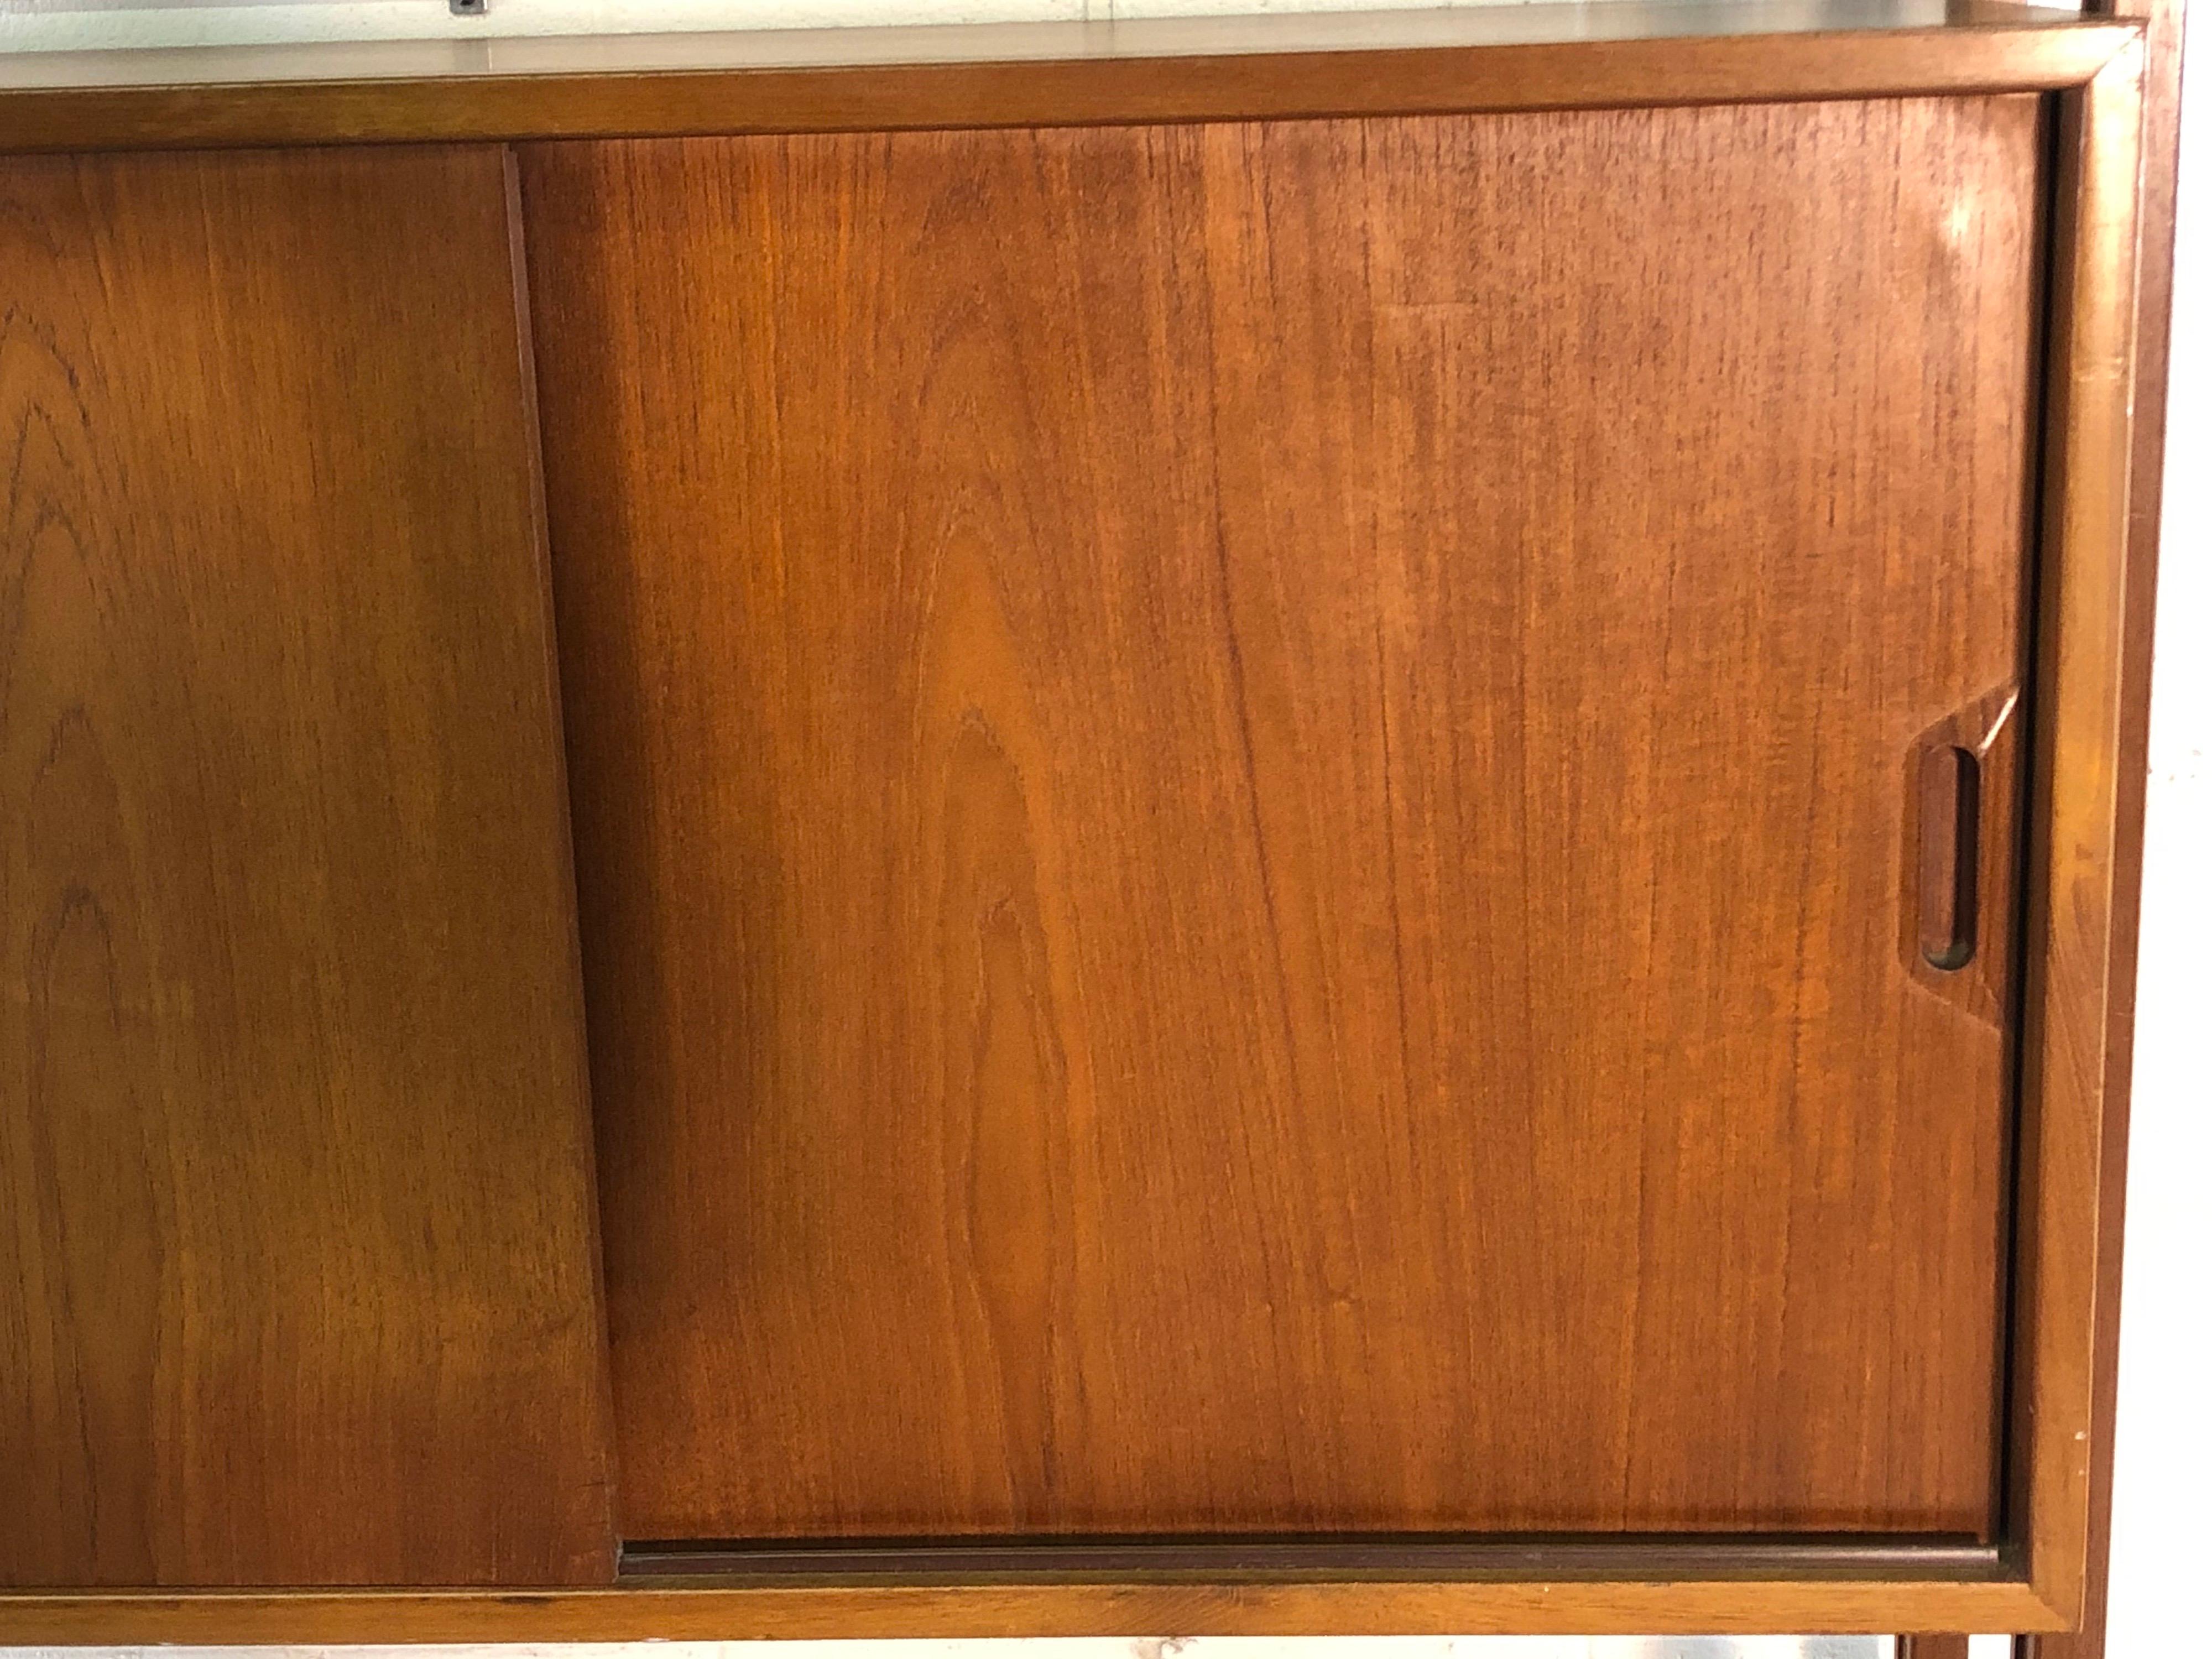 Danish Teak Room Divider Wall Unit In Good Condition For Sale In Amherst, NH